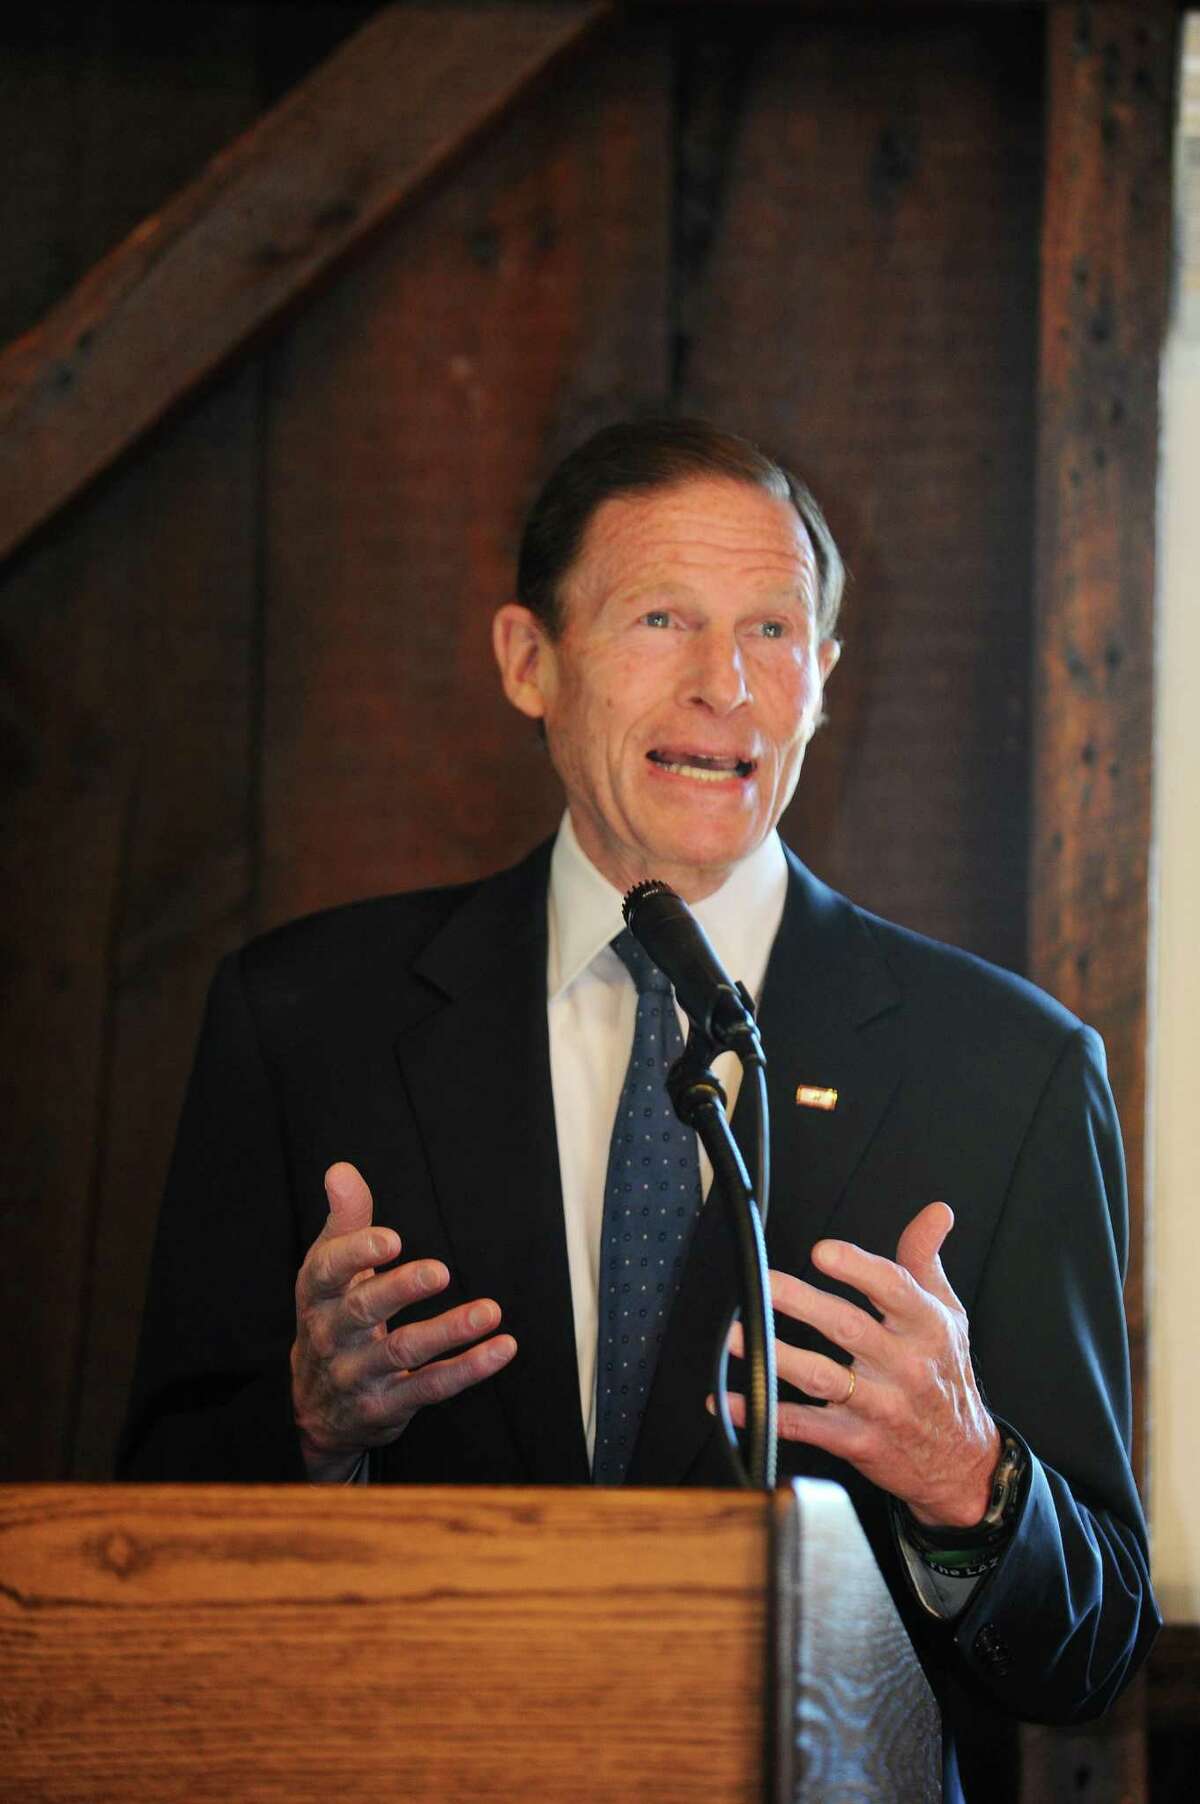 U.S. Sen. Richard Blumenthal (D, Conn.) speaks before the groundbreaking at the Greenwich Historical Society in Greenwich, Conn. on Sunday, April 9, 2017.